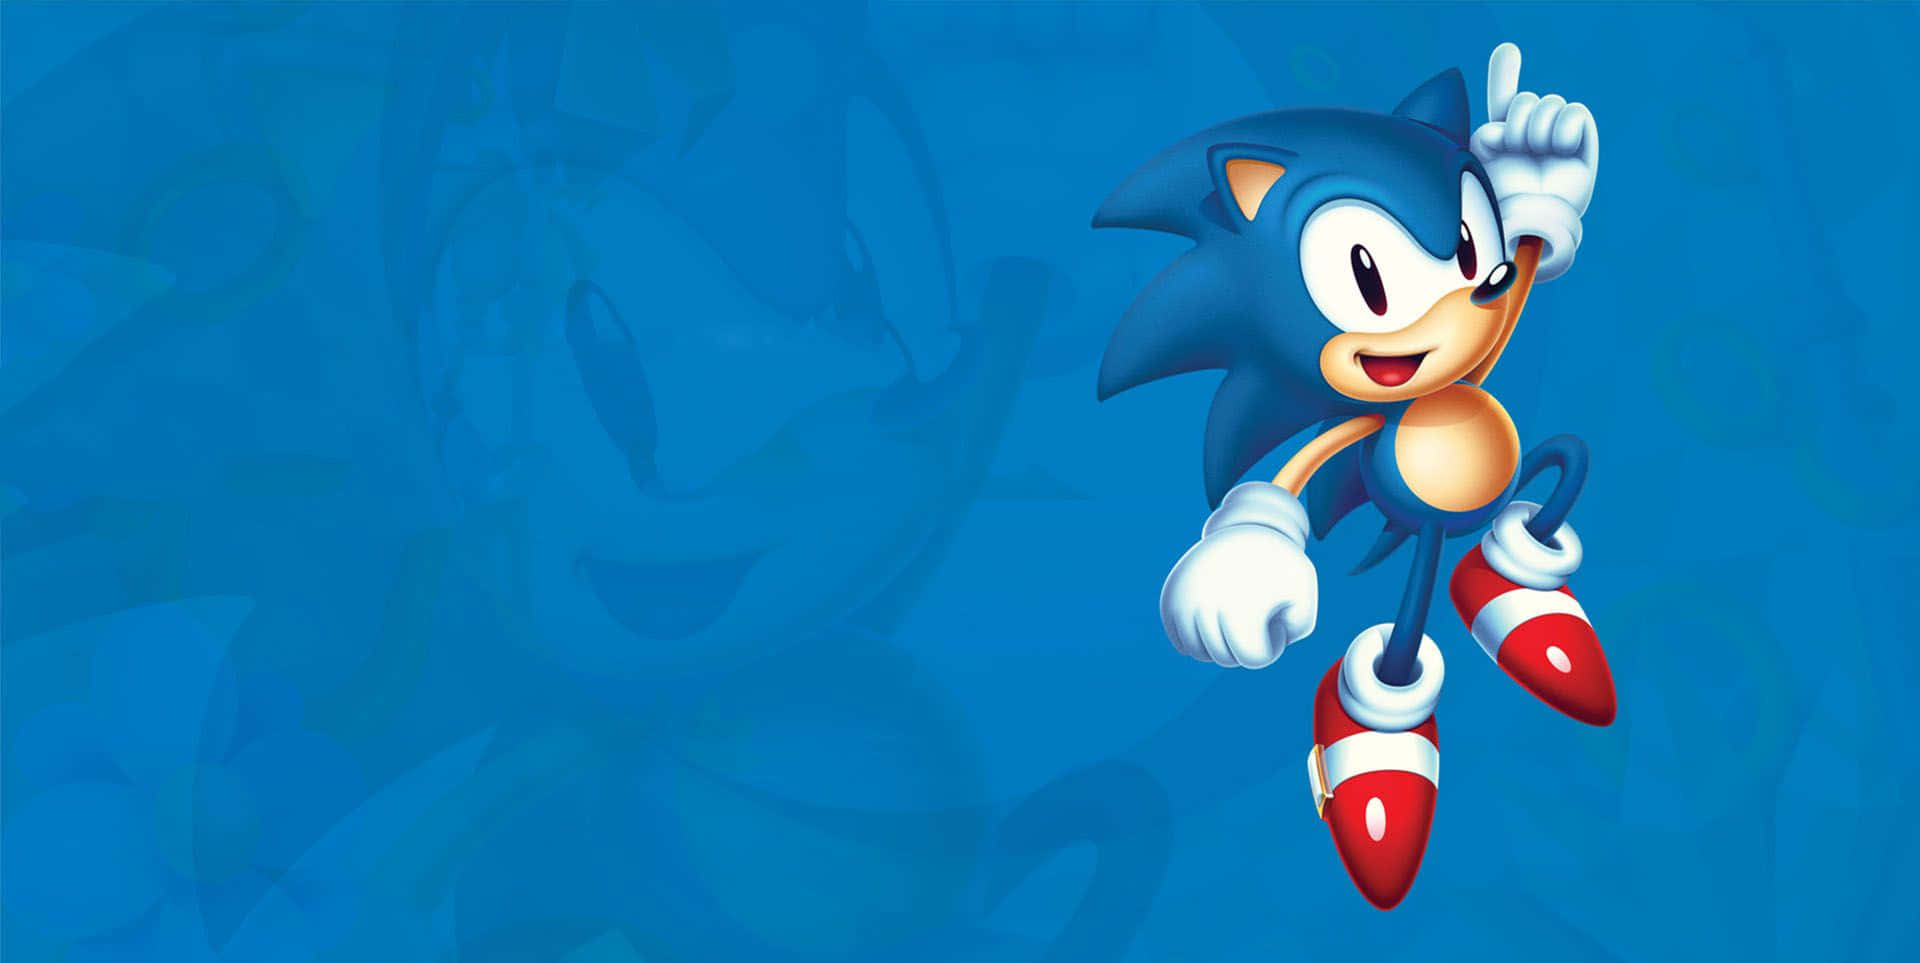 10 Sonic CD HD Wallpapers and Backgrounds